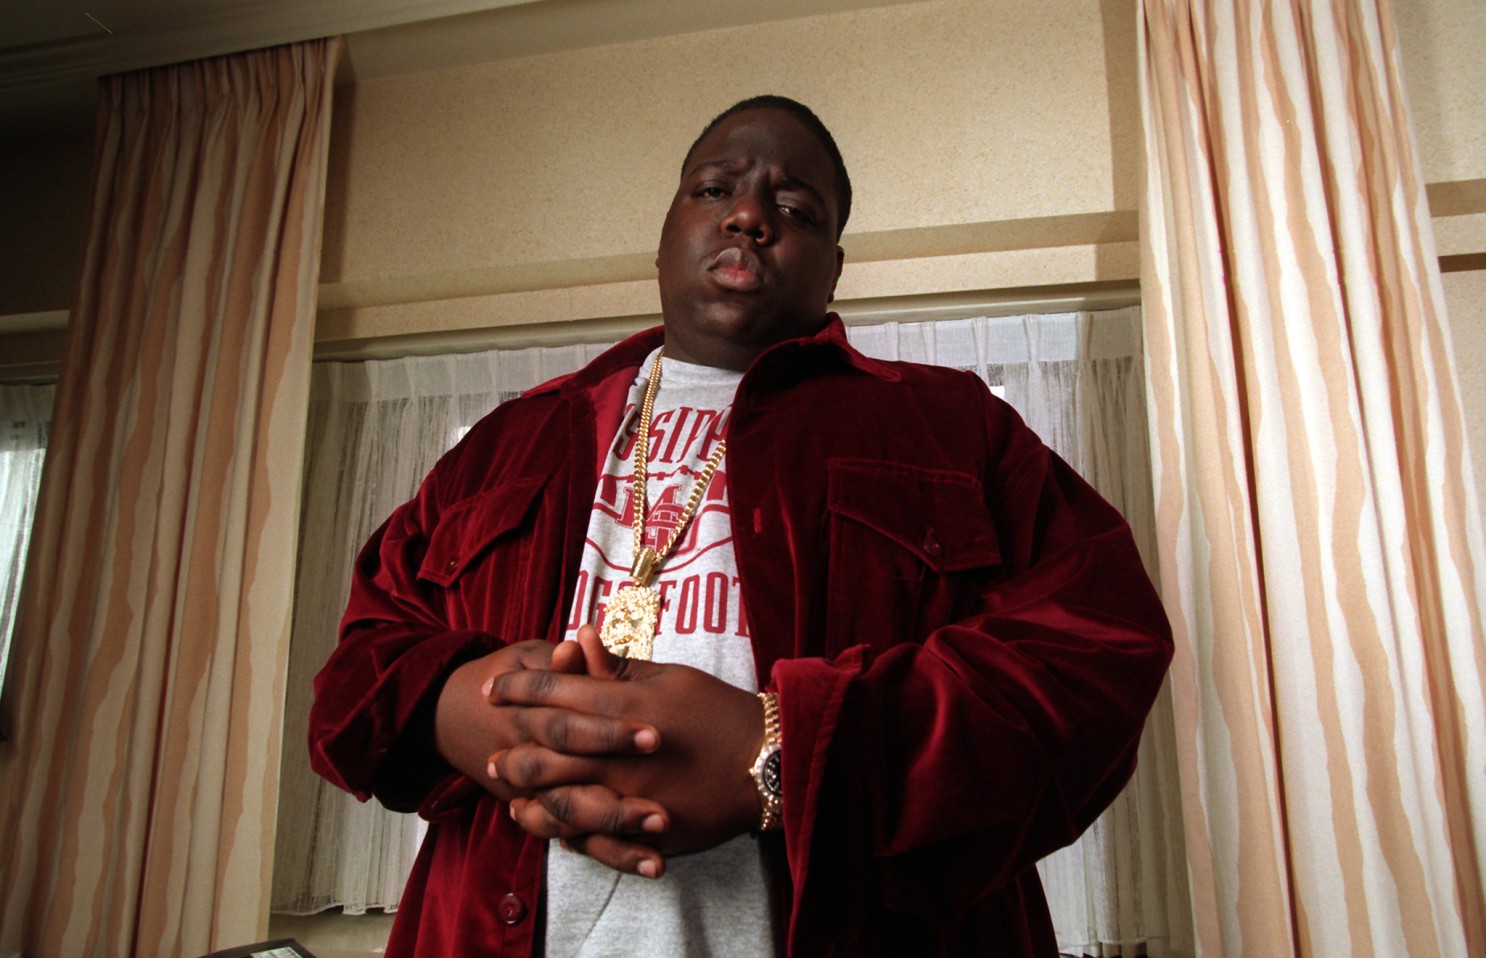 New Notorious B.I.G. documentary “Biggie: I Got A Story To Tell” Releases March 1st on Netflix